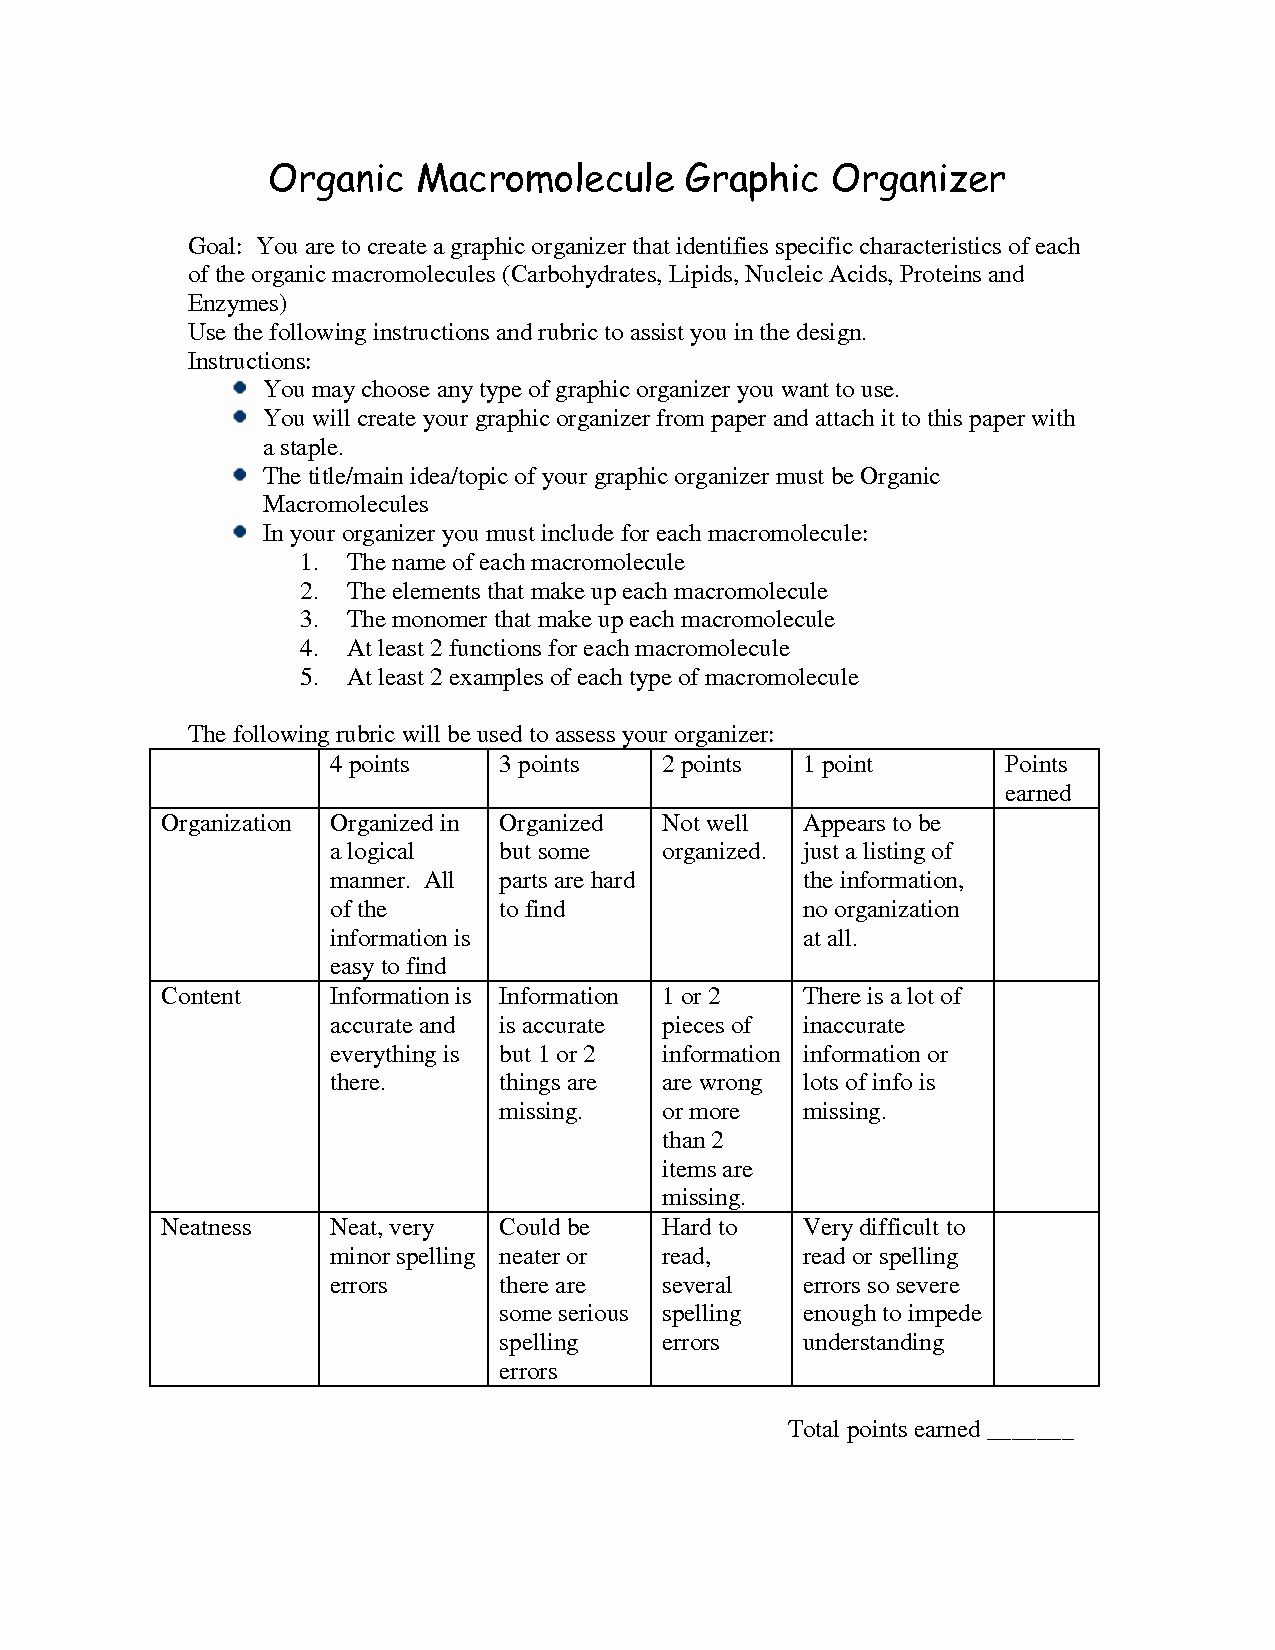 post carbohydrates lipids and proteins worksheet